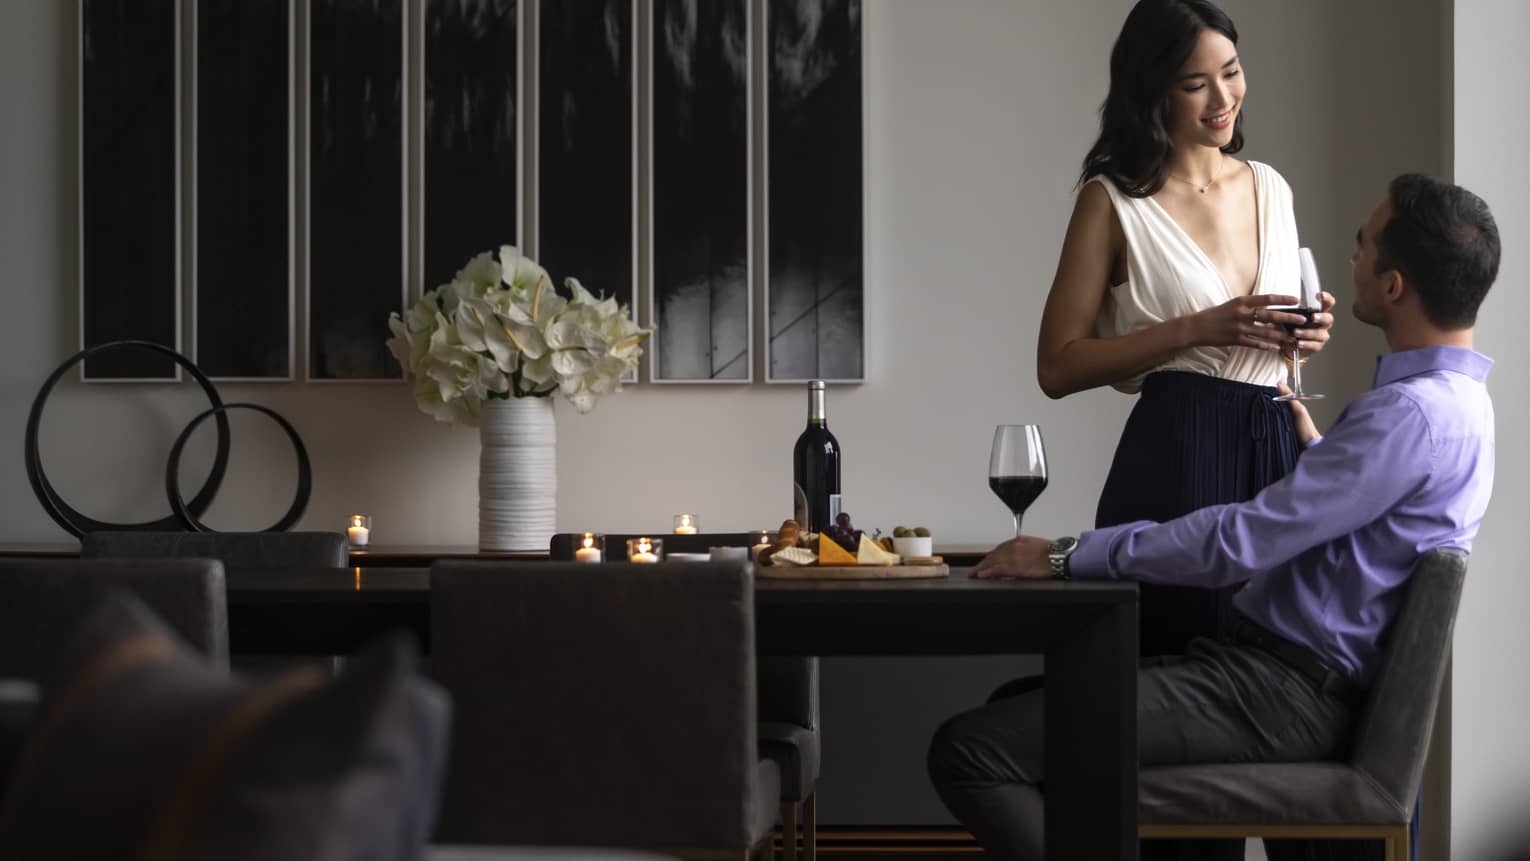 Man and woman drink wine at dining table